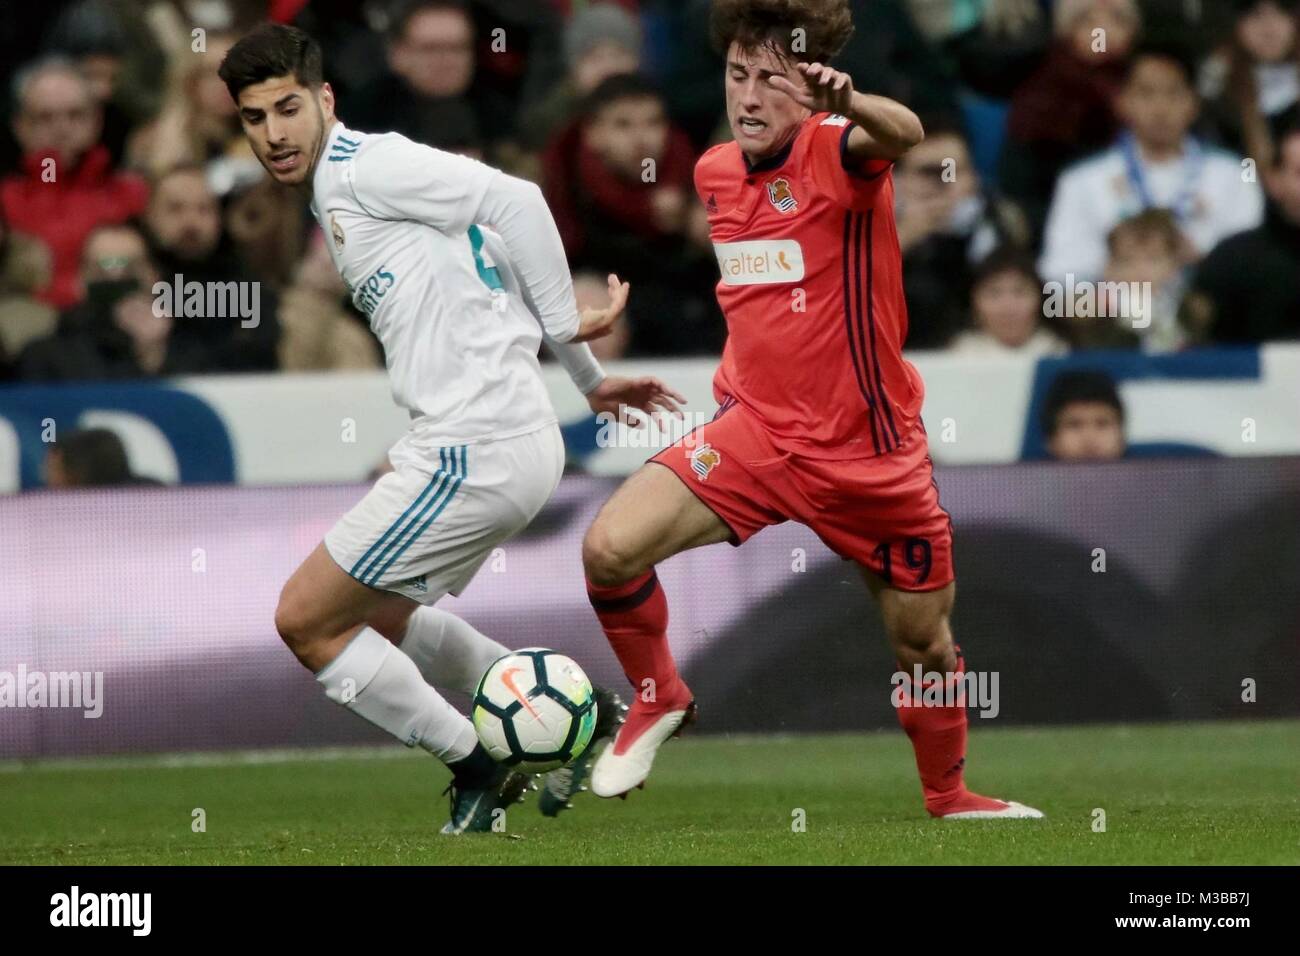 Madrid, Spain. 10th Feb, 2018. Real Madrid's Marco Asesnsio (L) and Real Sociedad's Alvaro Odriozola vie for the ball during a Spanish league match between Real Madrid and Real Sociedad in Madrid, Spain, on Feb. 10, 2018. Real Madrid won 5-2. Credit: Juan Carlos Rojas/Xinhua/Alamy Live News Stock Photo